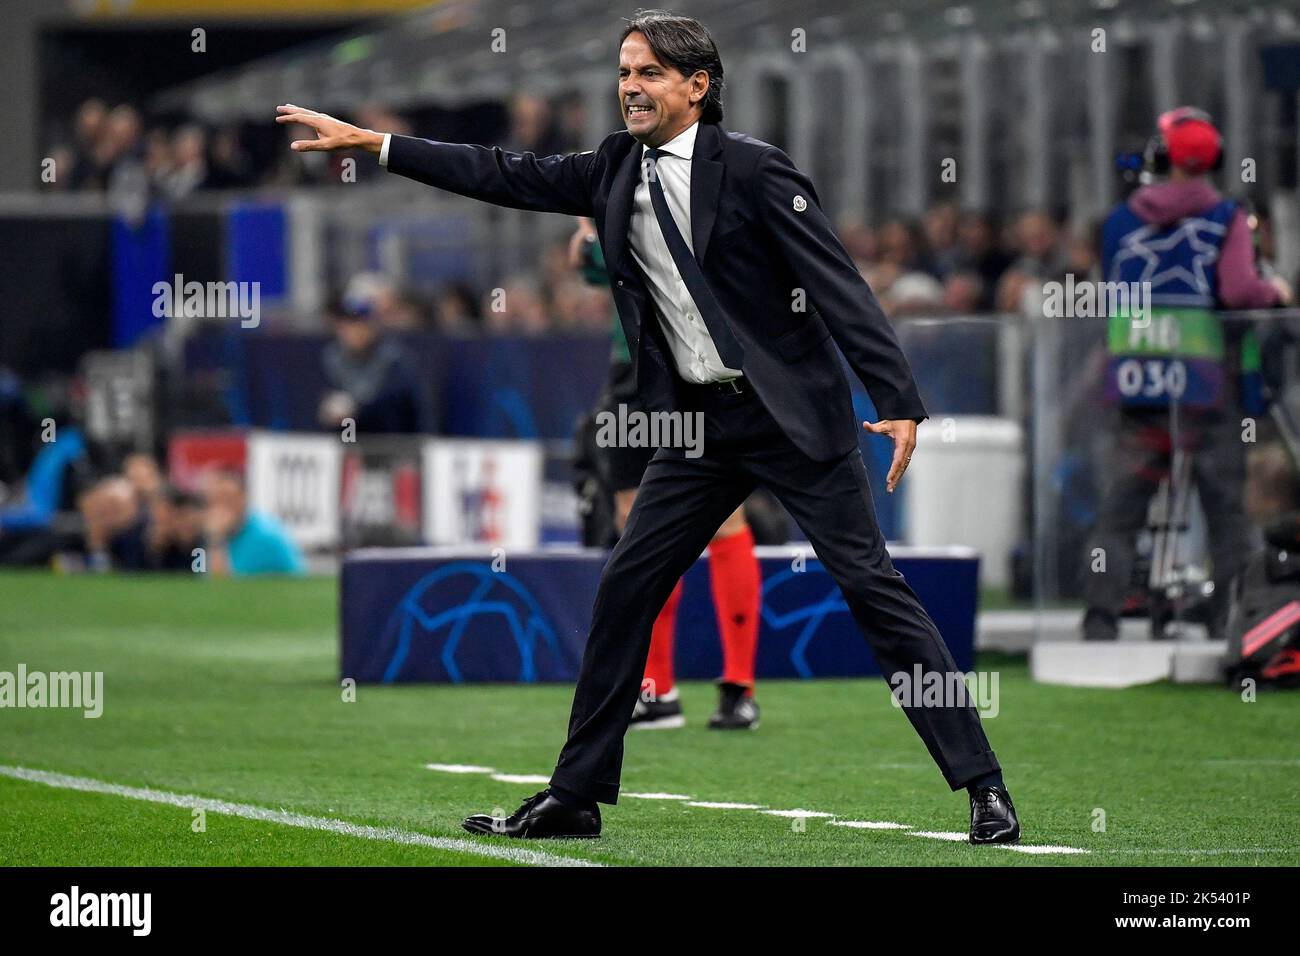 Simone Inzaghi head coach of FC Internazionale gestures during the Champions League Group C football match between FC Internazionale and FCB Barcelona Stock Photo